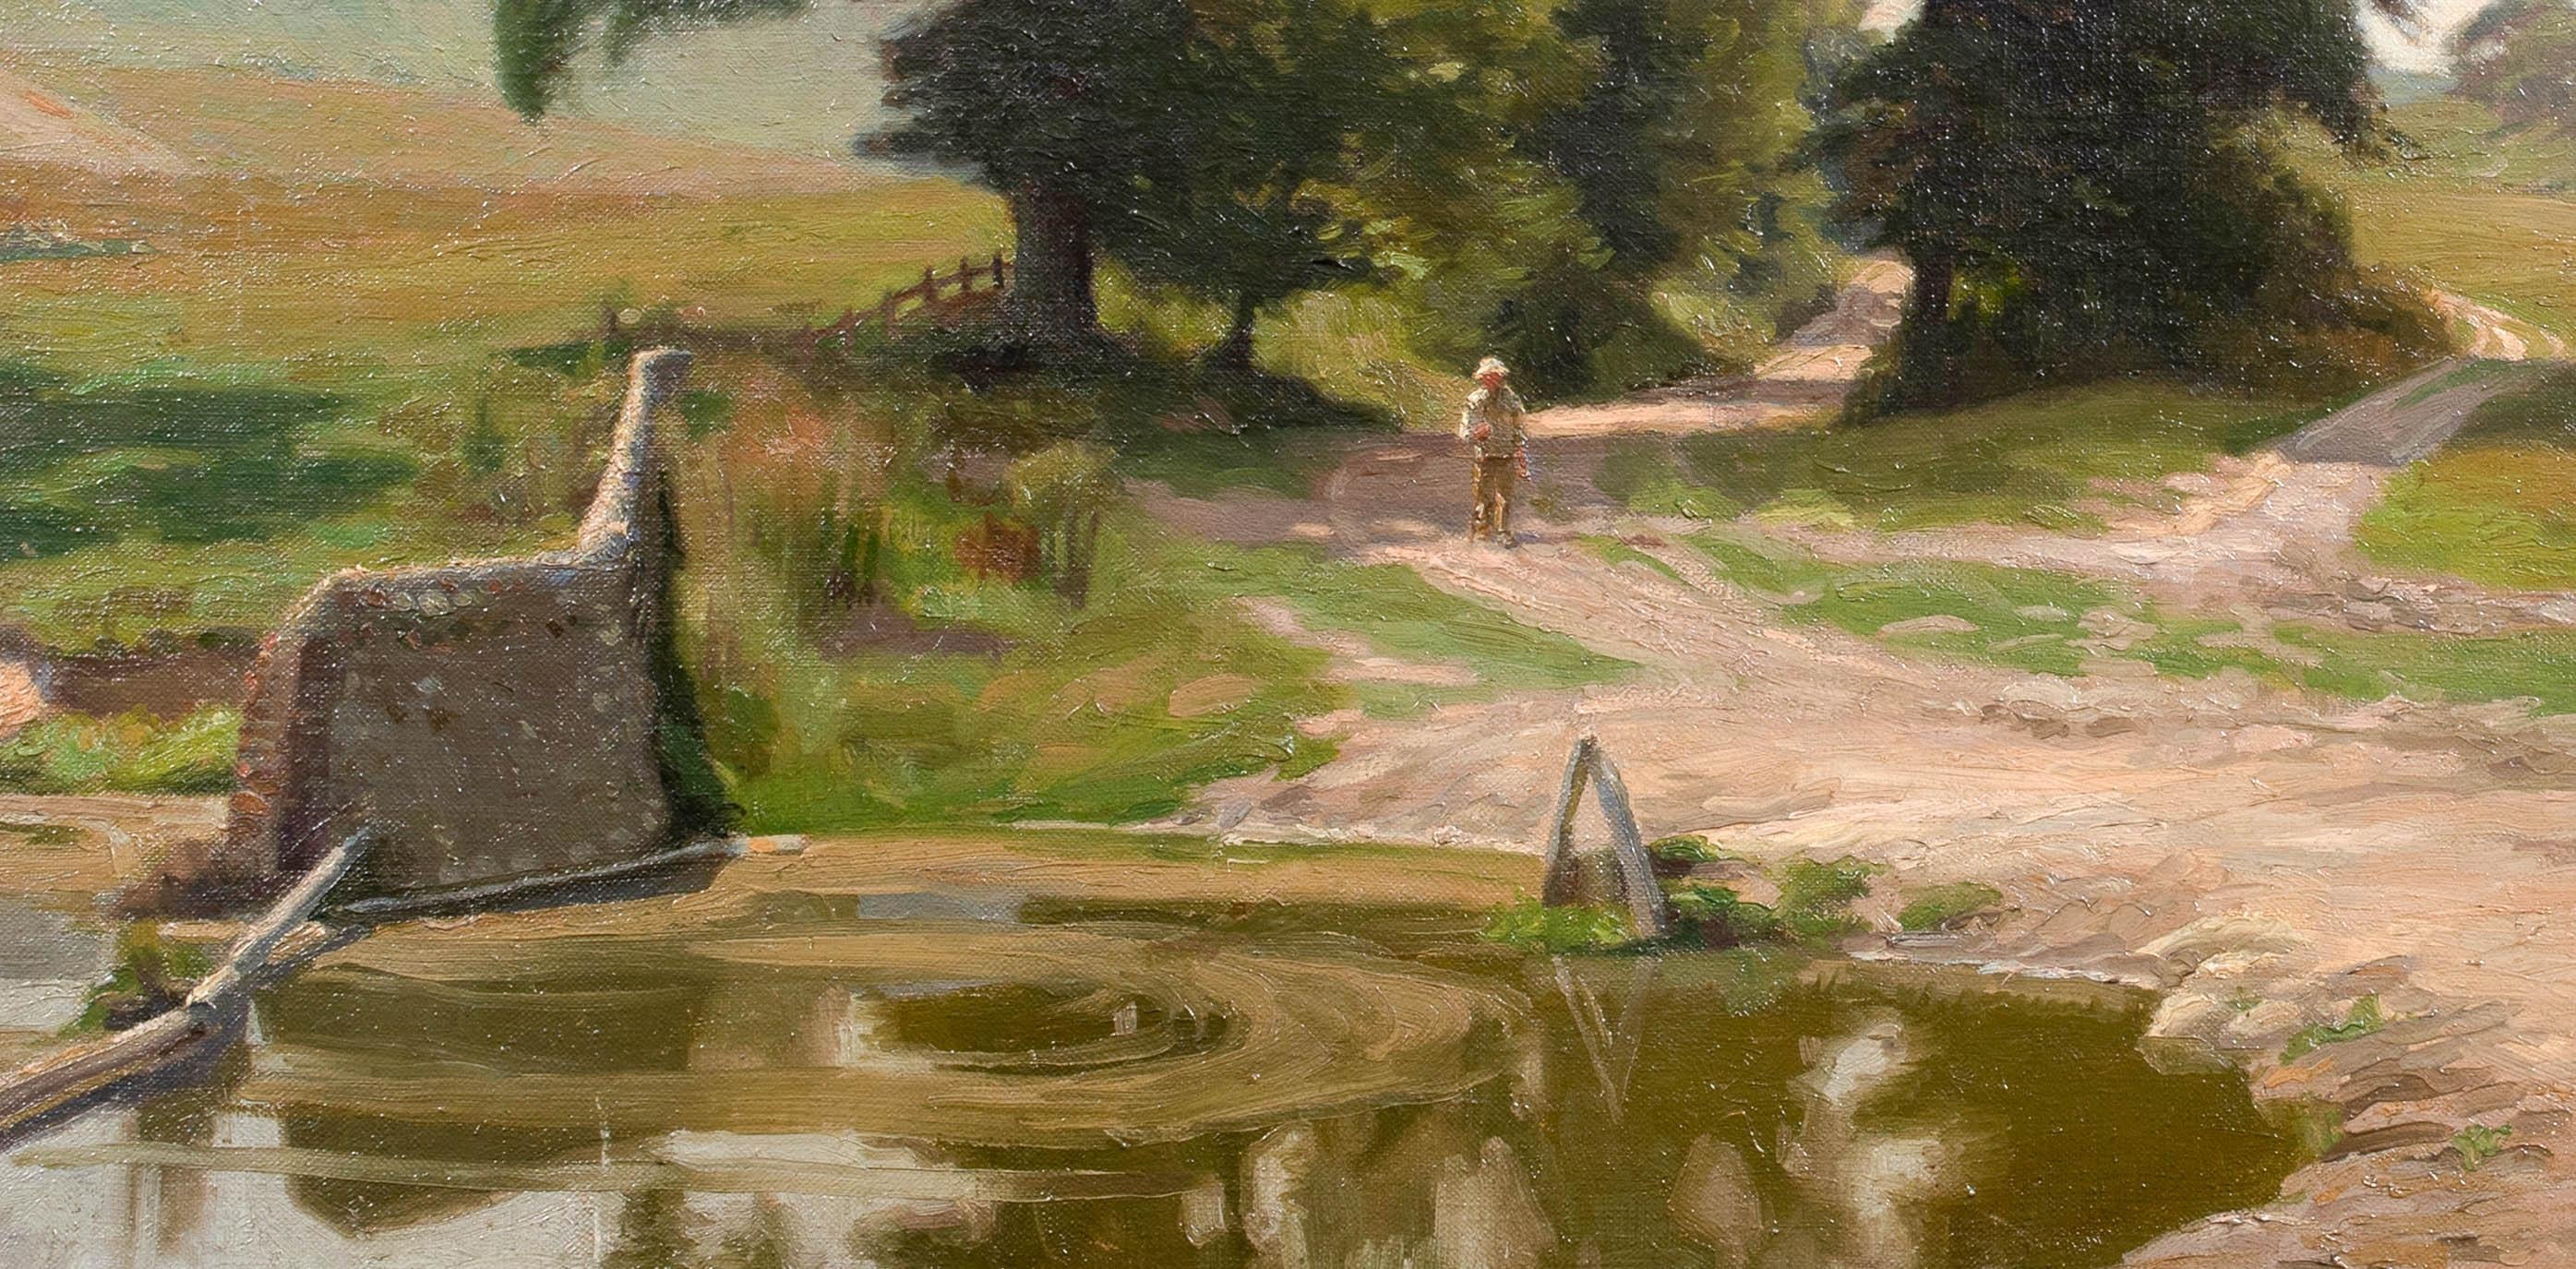 A Dorset Watering Hole, early 20th Century 

by CHARLES HENRY HARRISON BURLEIGH (BRITISH, 1875-1956)

Large circa 1920 landscape view of a Dorset watering hole, oil on canvas by Charles Burleigh. Exceptional detail and sunlit study a figure walking